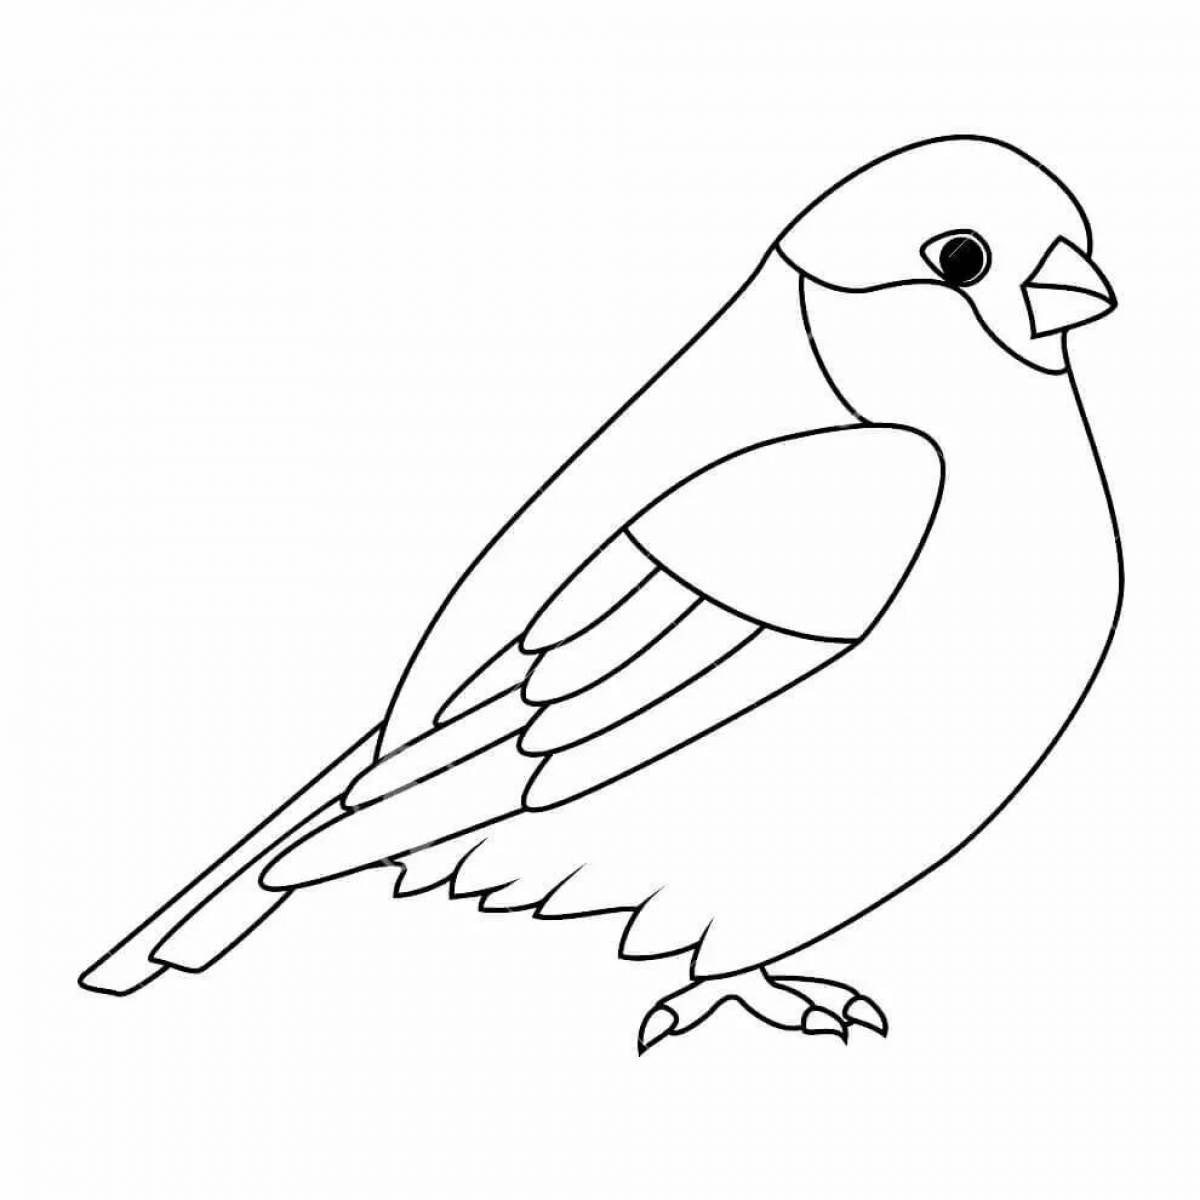 Fancy drawing of a bullfinch coloring for kids